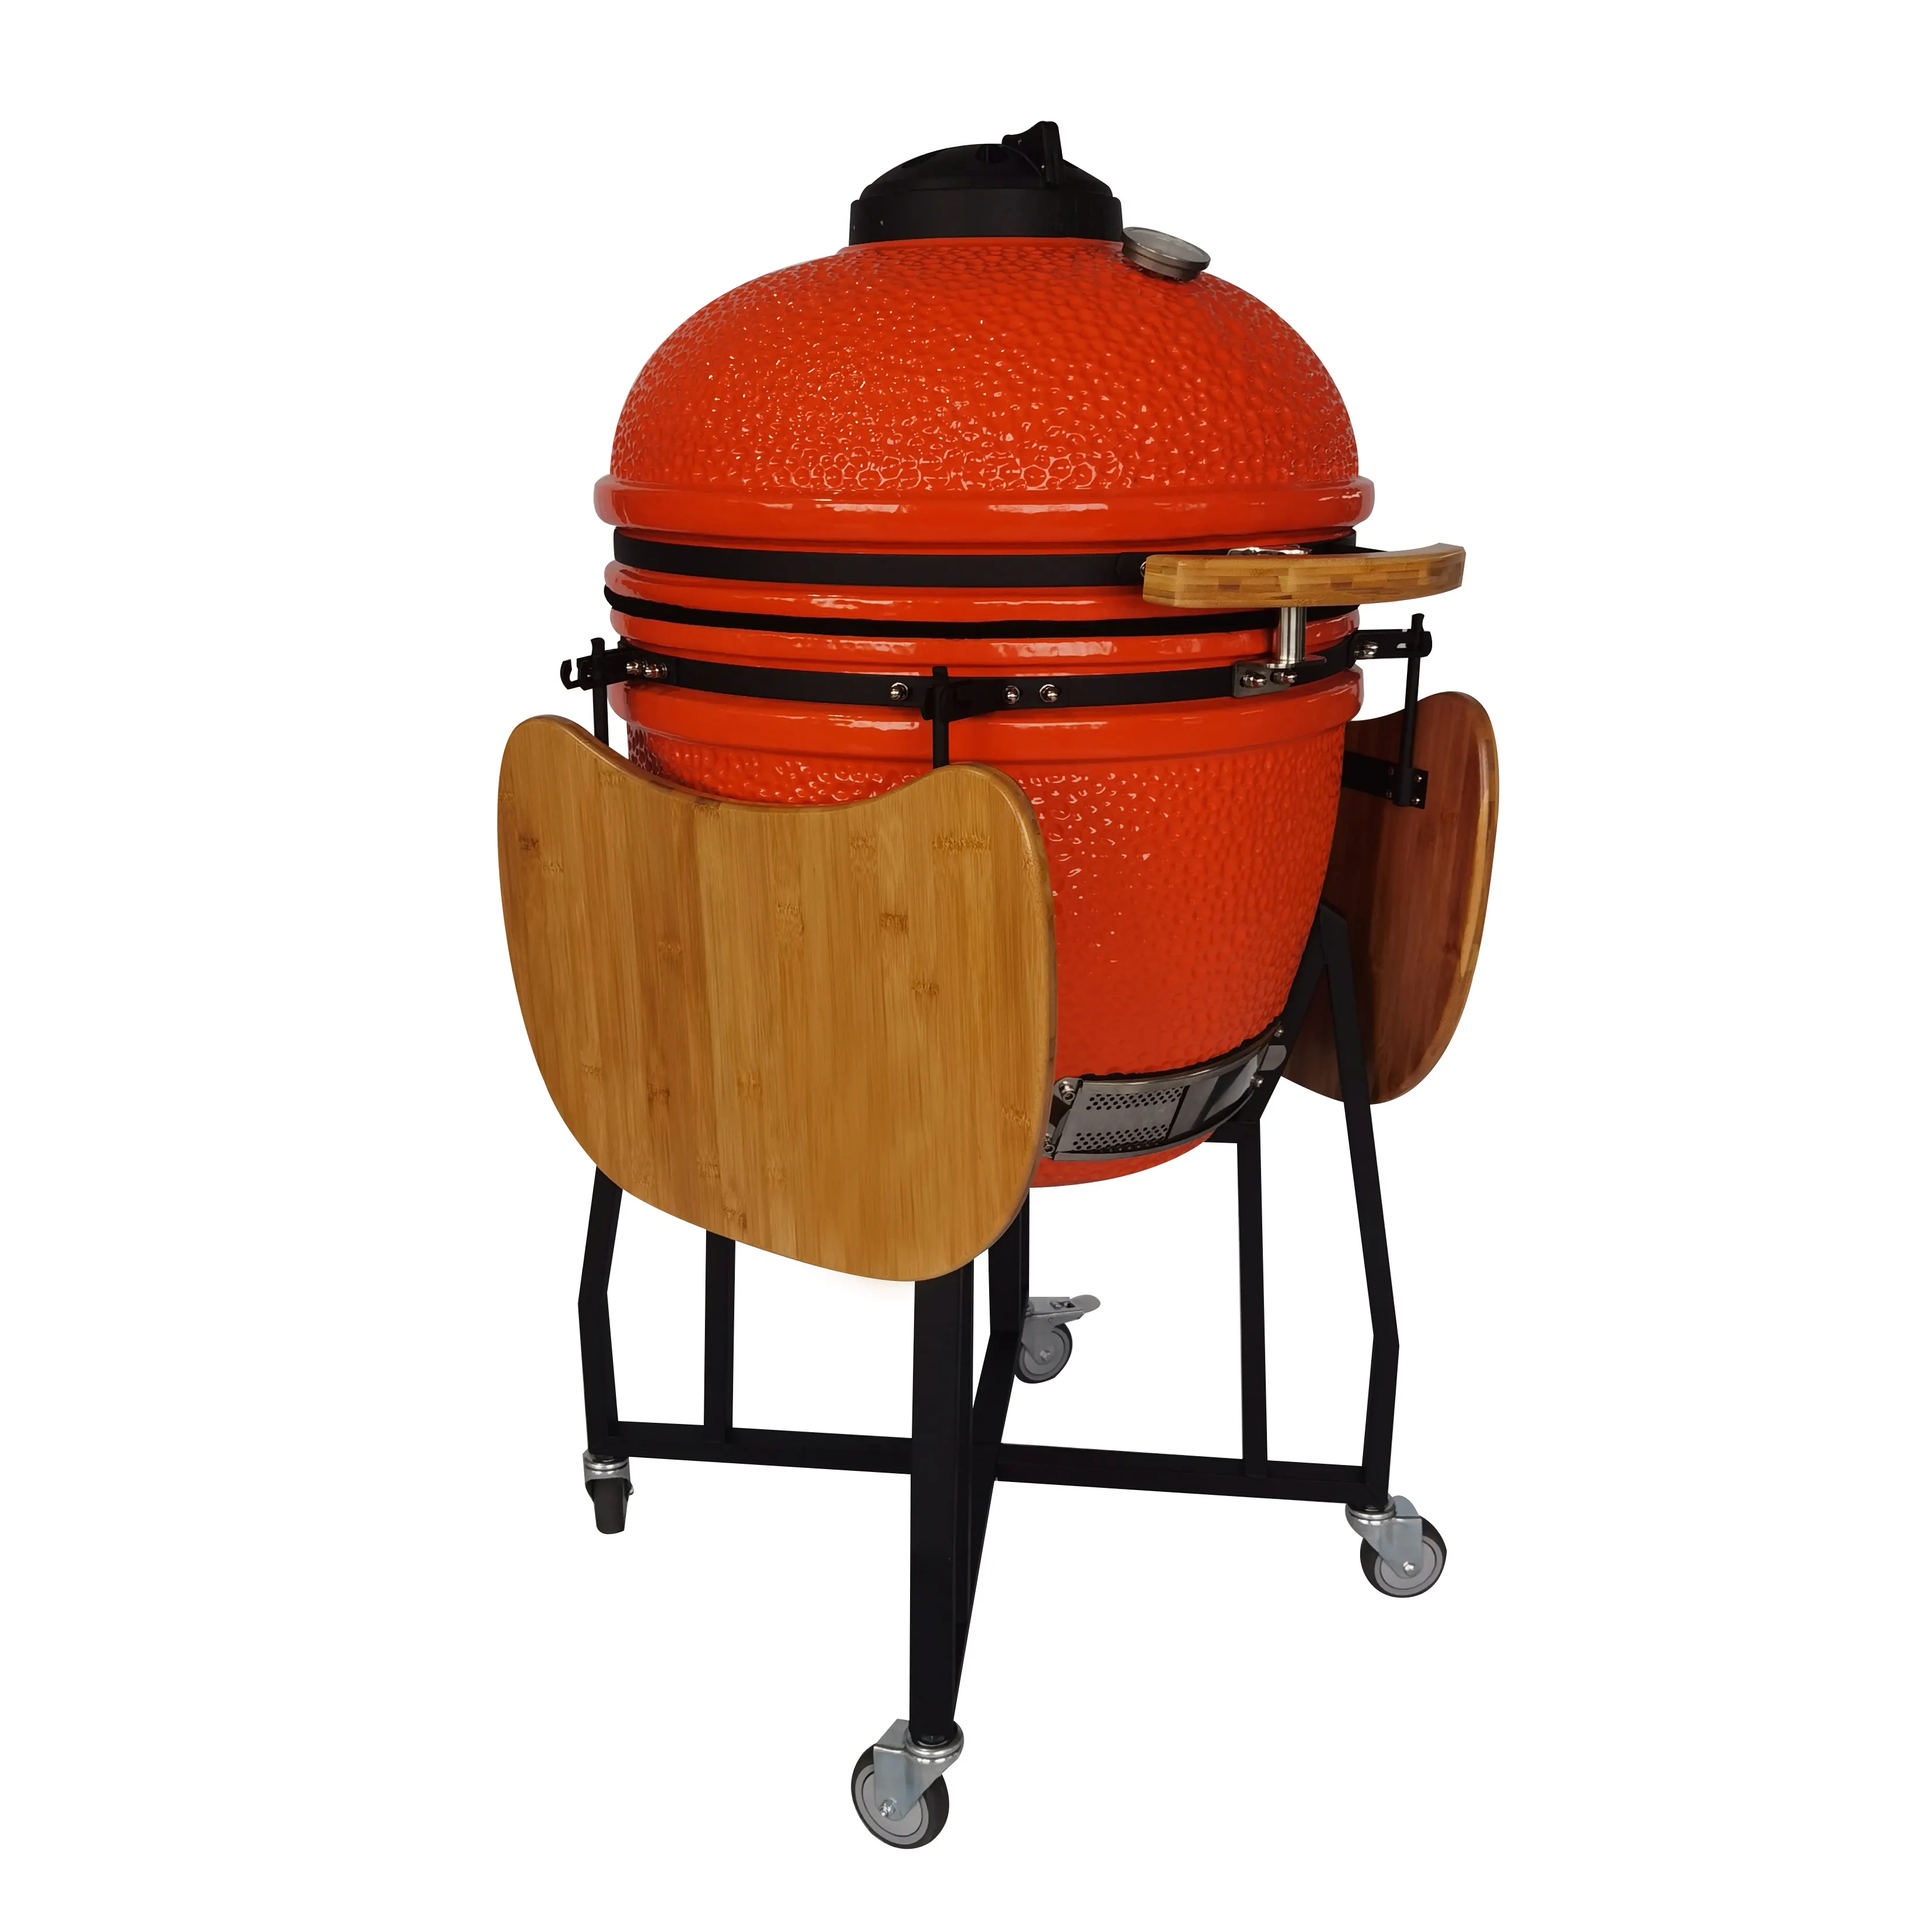 manufacturing best quality ceramic bbq smoker Kamado grill for restaurant outdoor kitchen